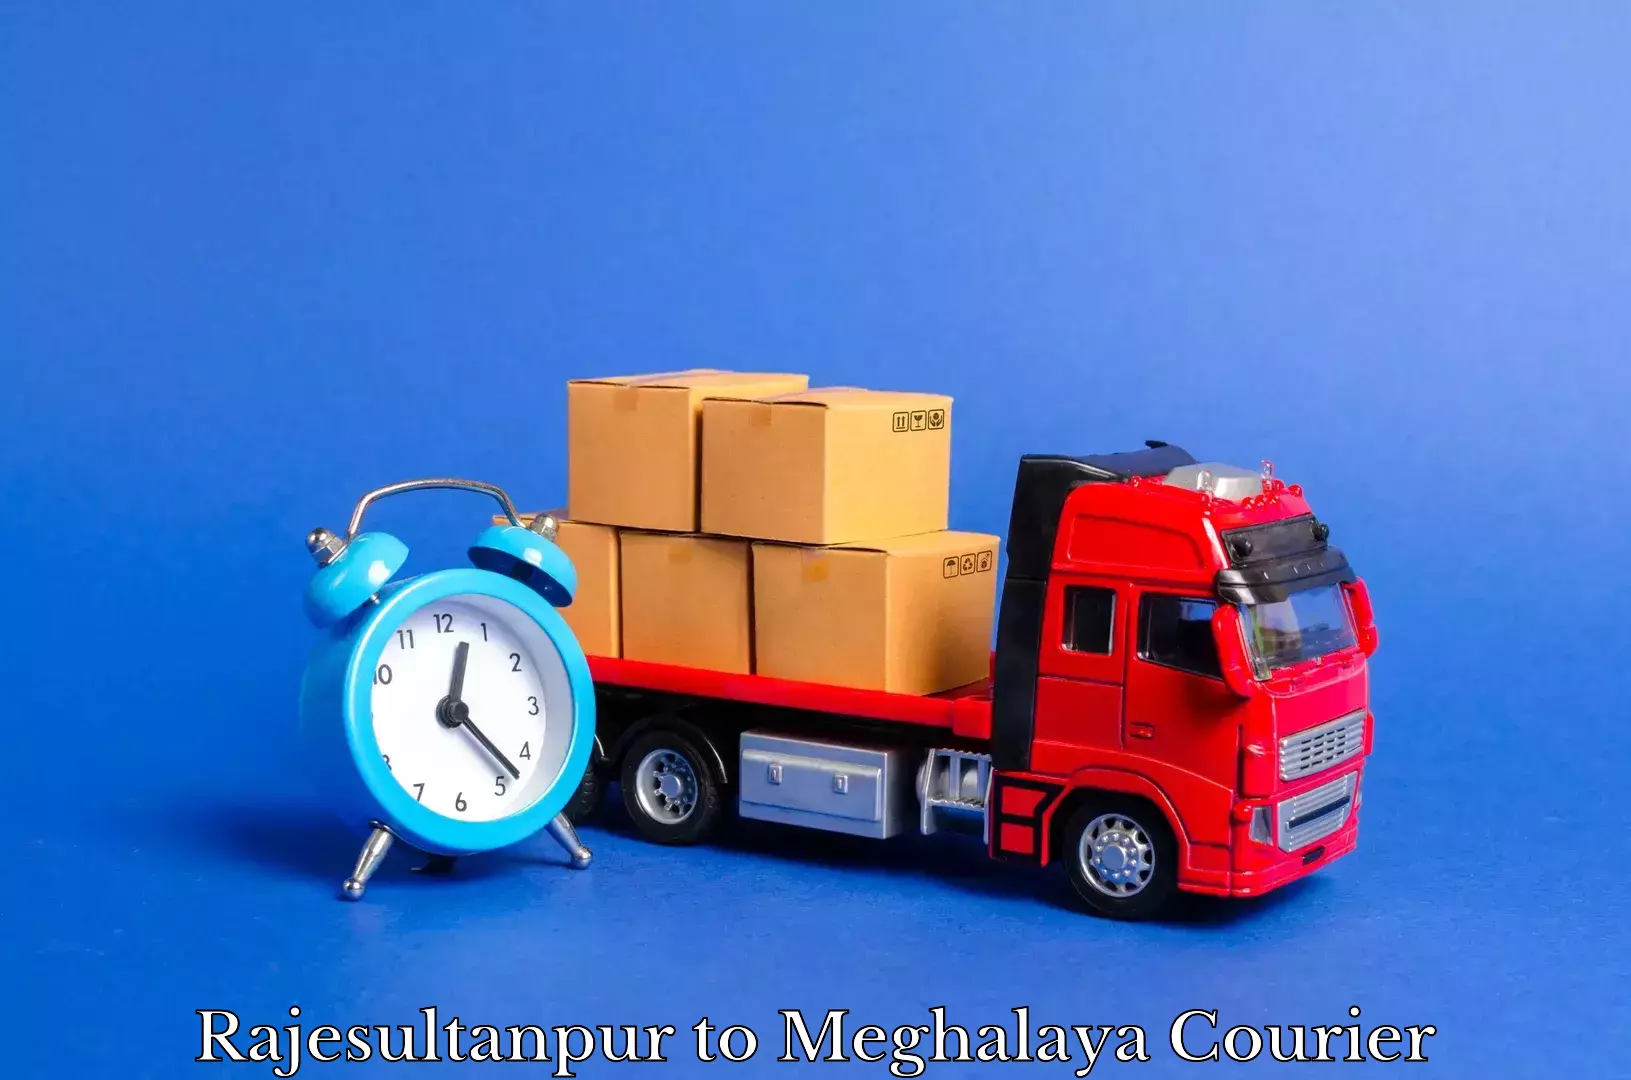 Furniture moving experts Rajesultanpur to Dkhiah West